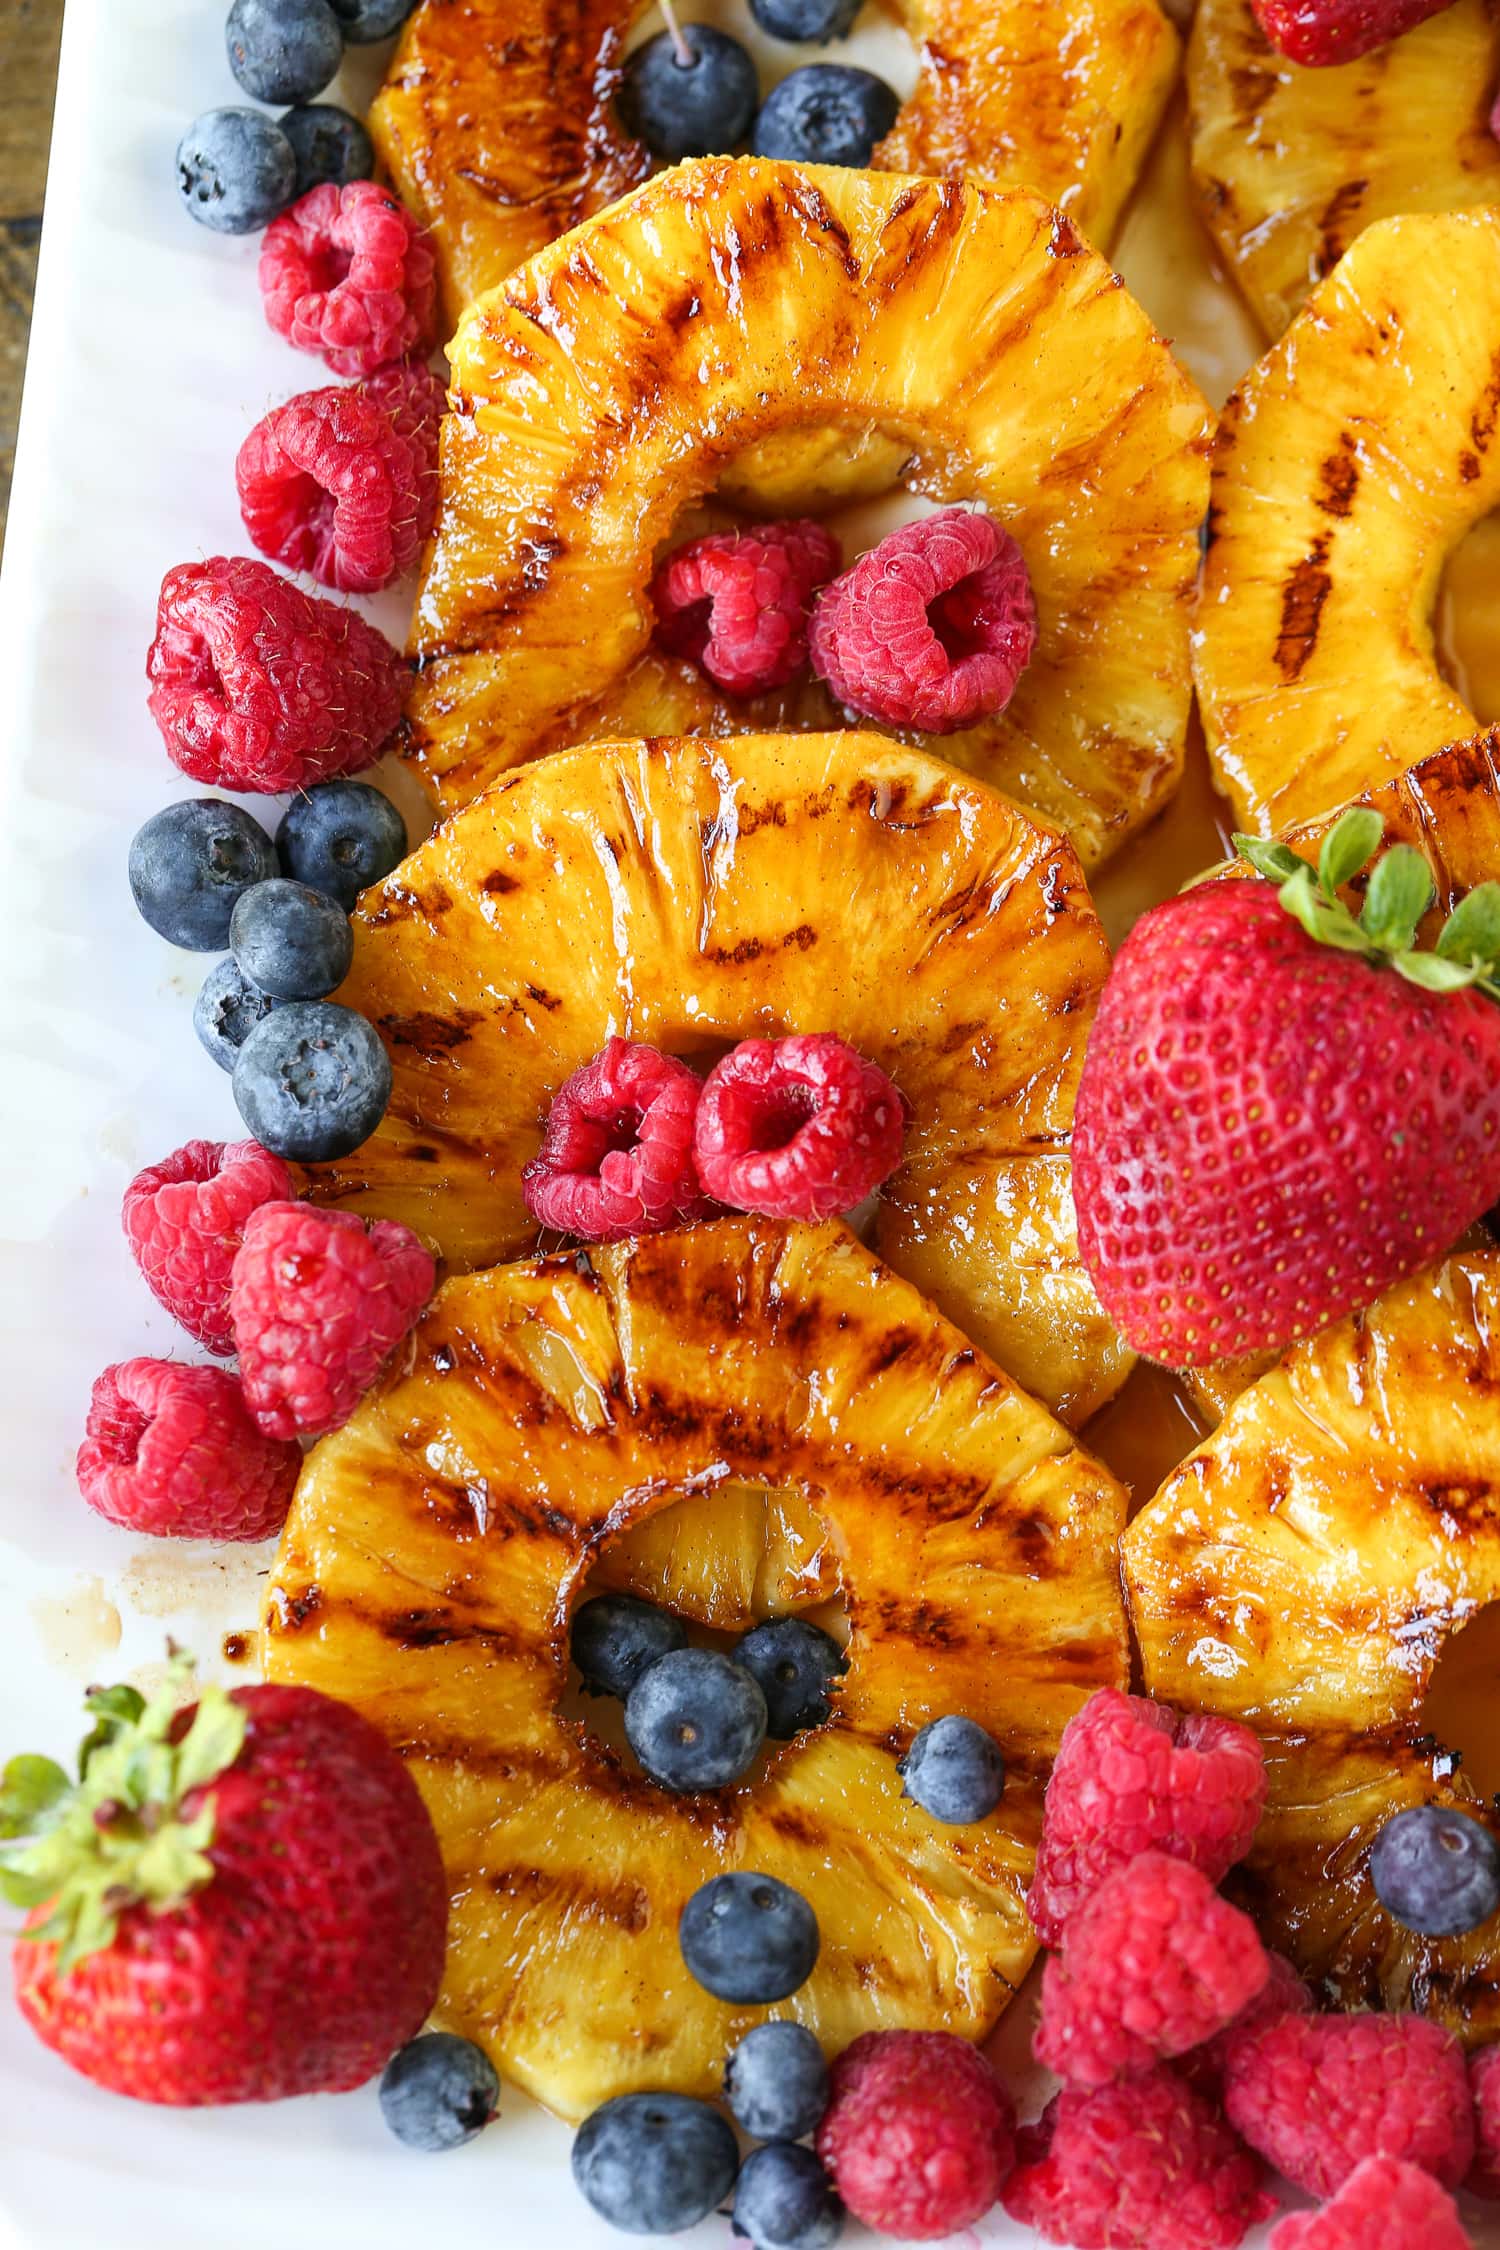 grilled pineapple slices on platter with berries